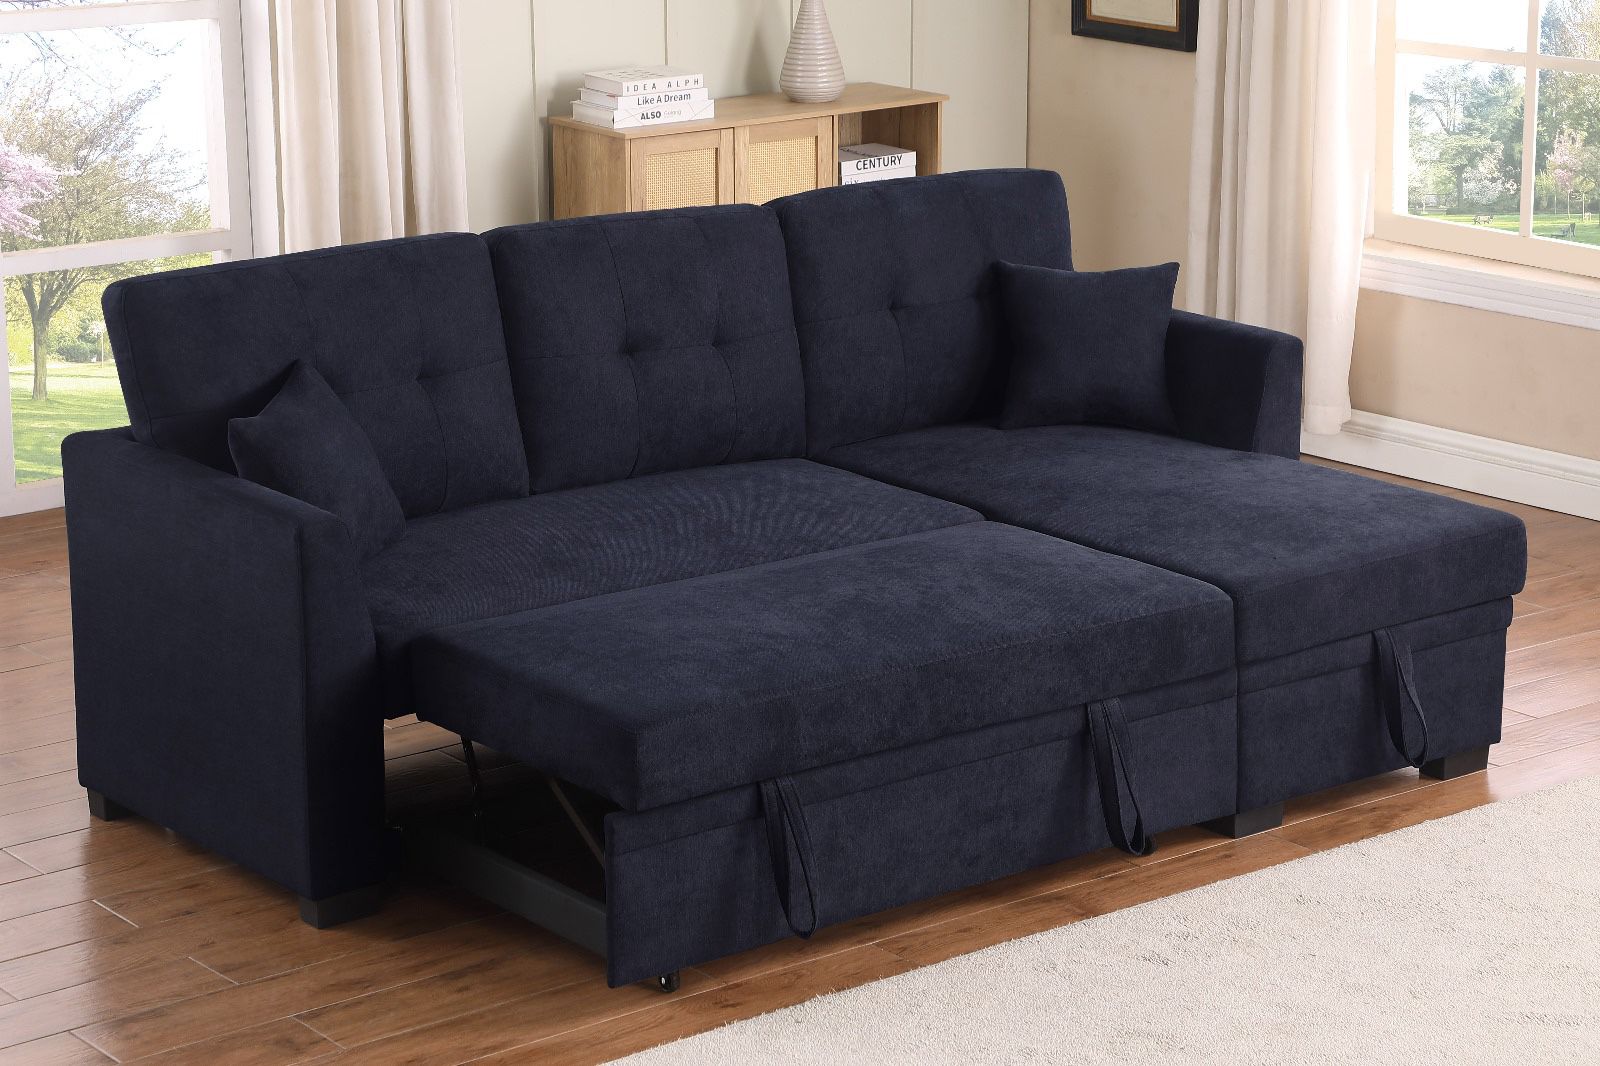 New! Quality Small Living Space Sectional Sofa Bed, Sofabed, Sectional Sofa Bed, Sofa Bed, Sleeper Sofa, Sofa Bed Couch, Sectional 